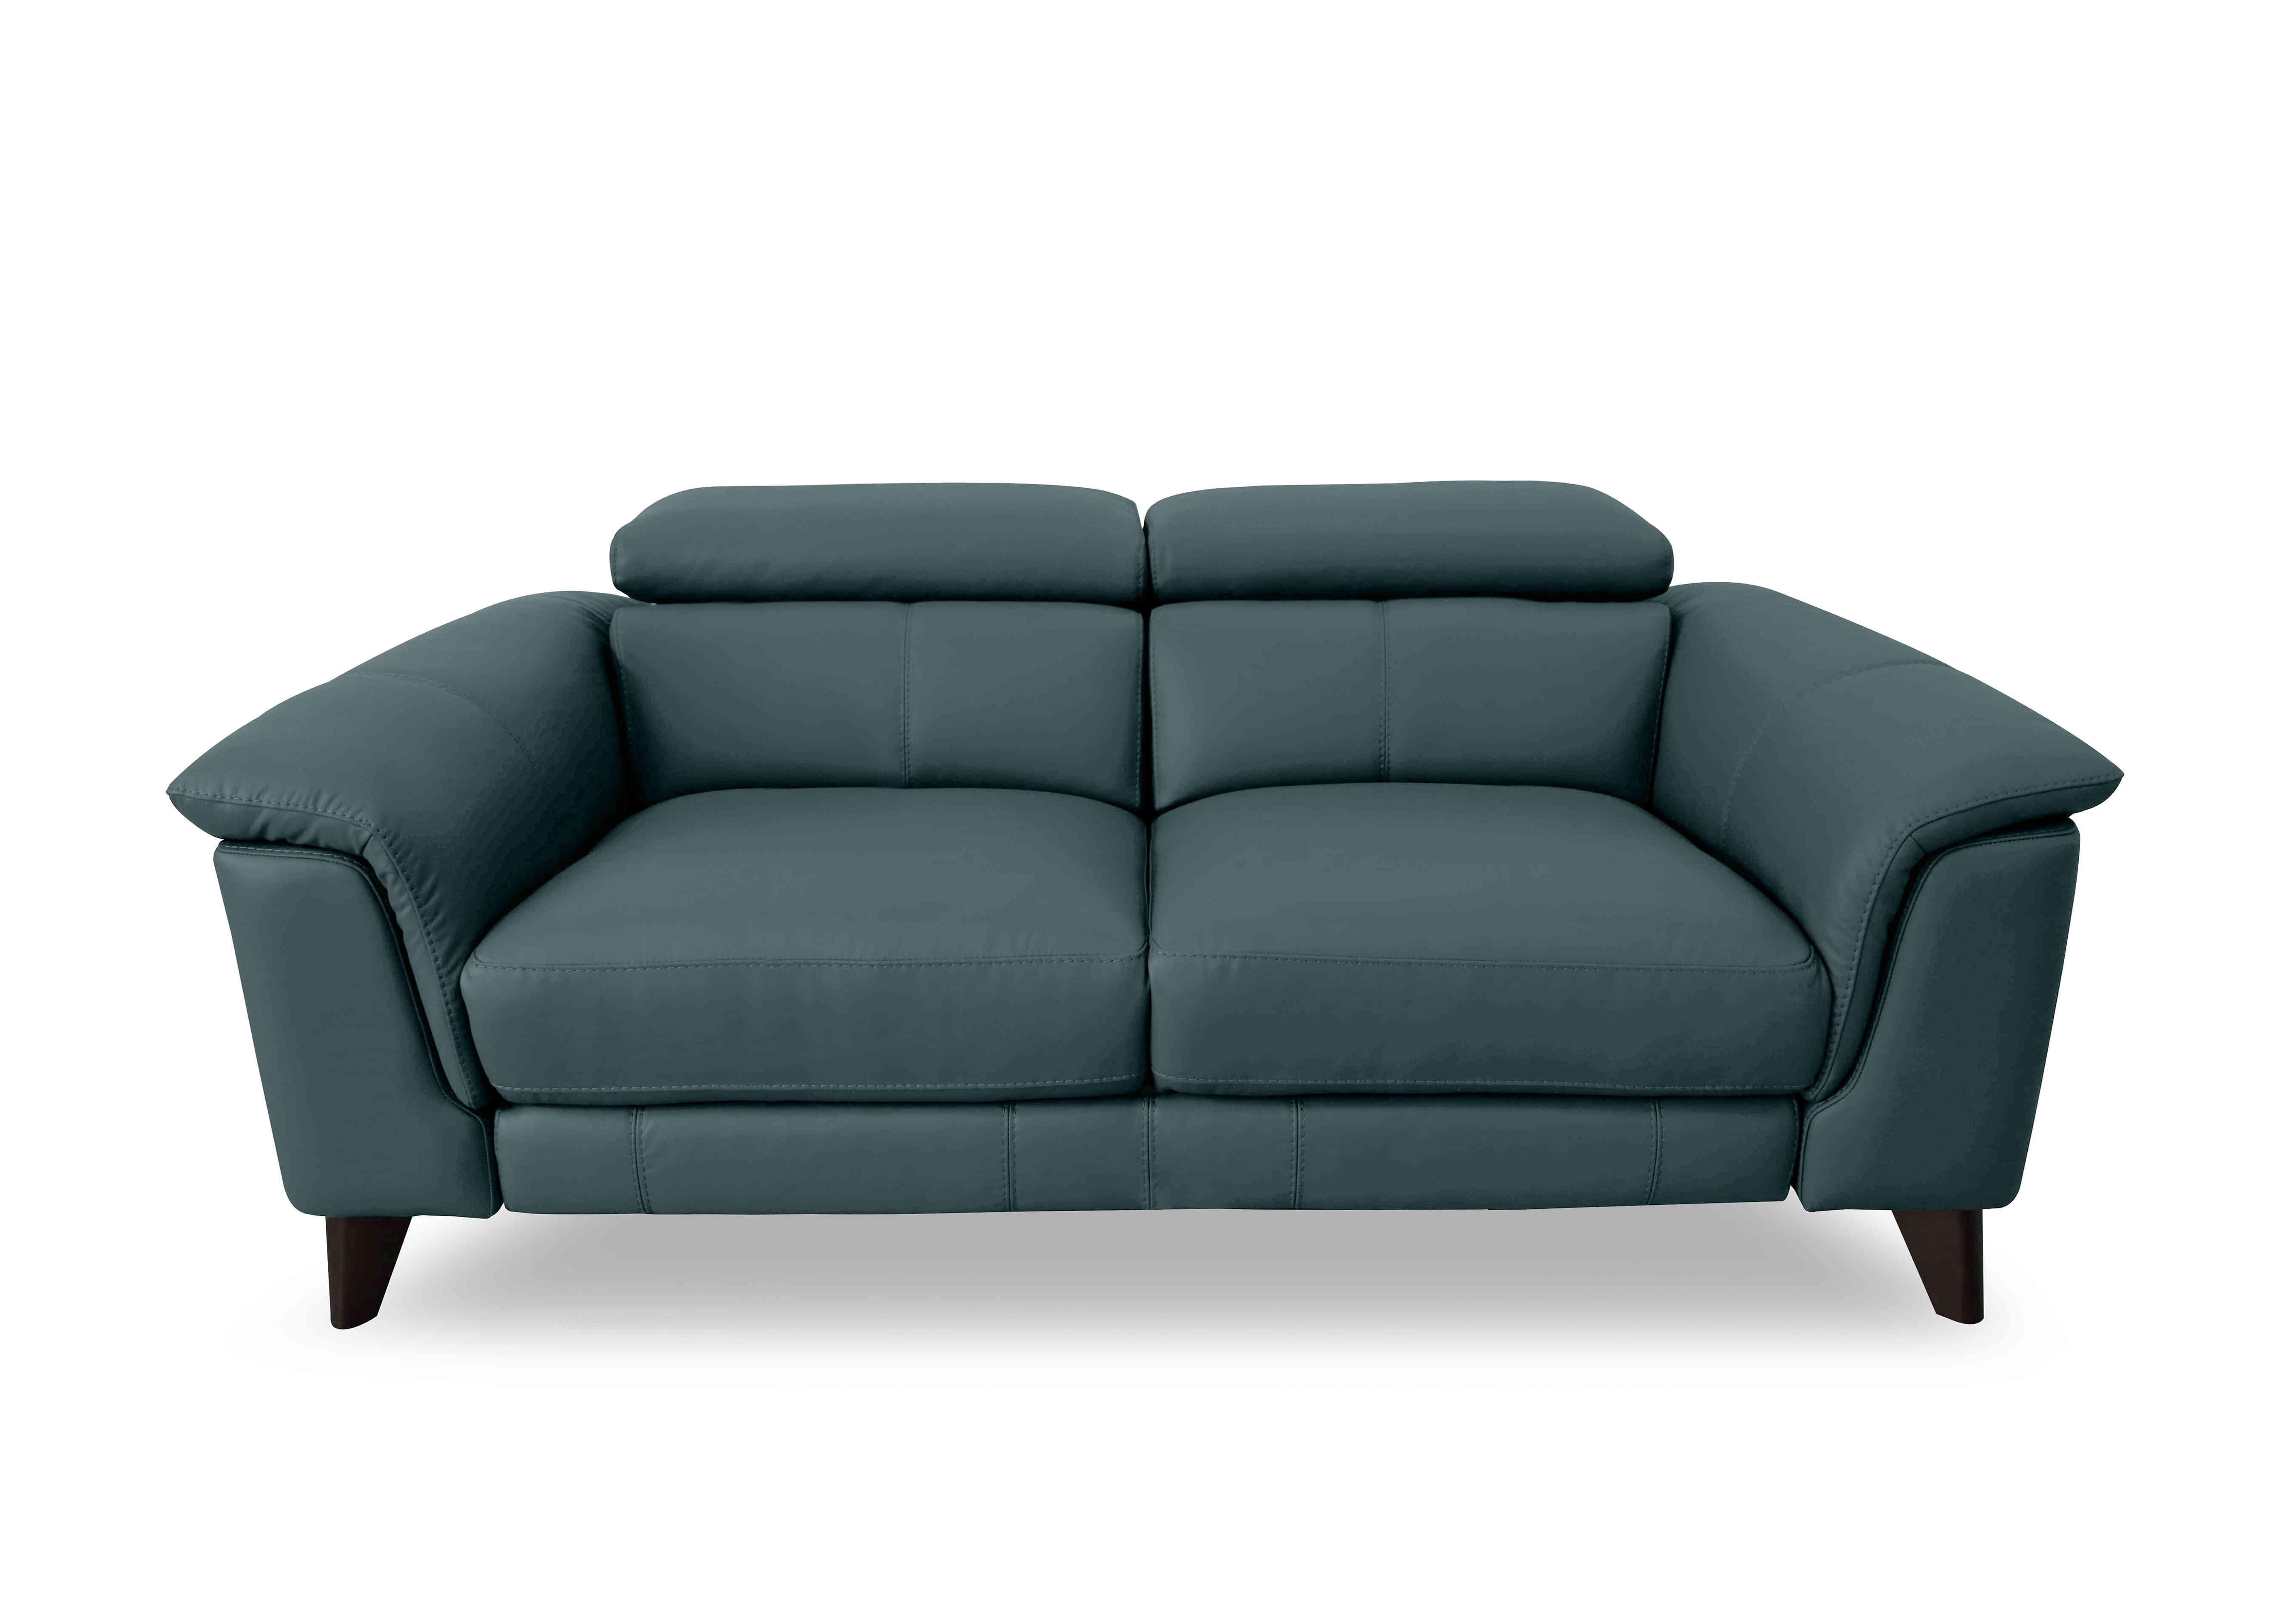 Wade 3 Seater Leather Sofa in Bv-301e Lake Green on Furniture Village